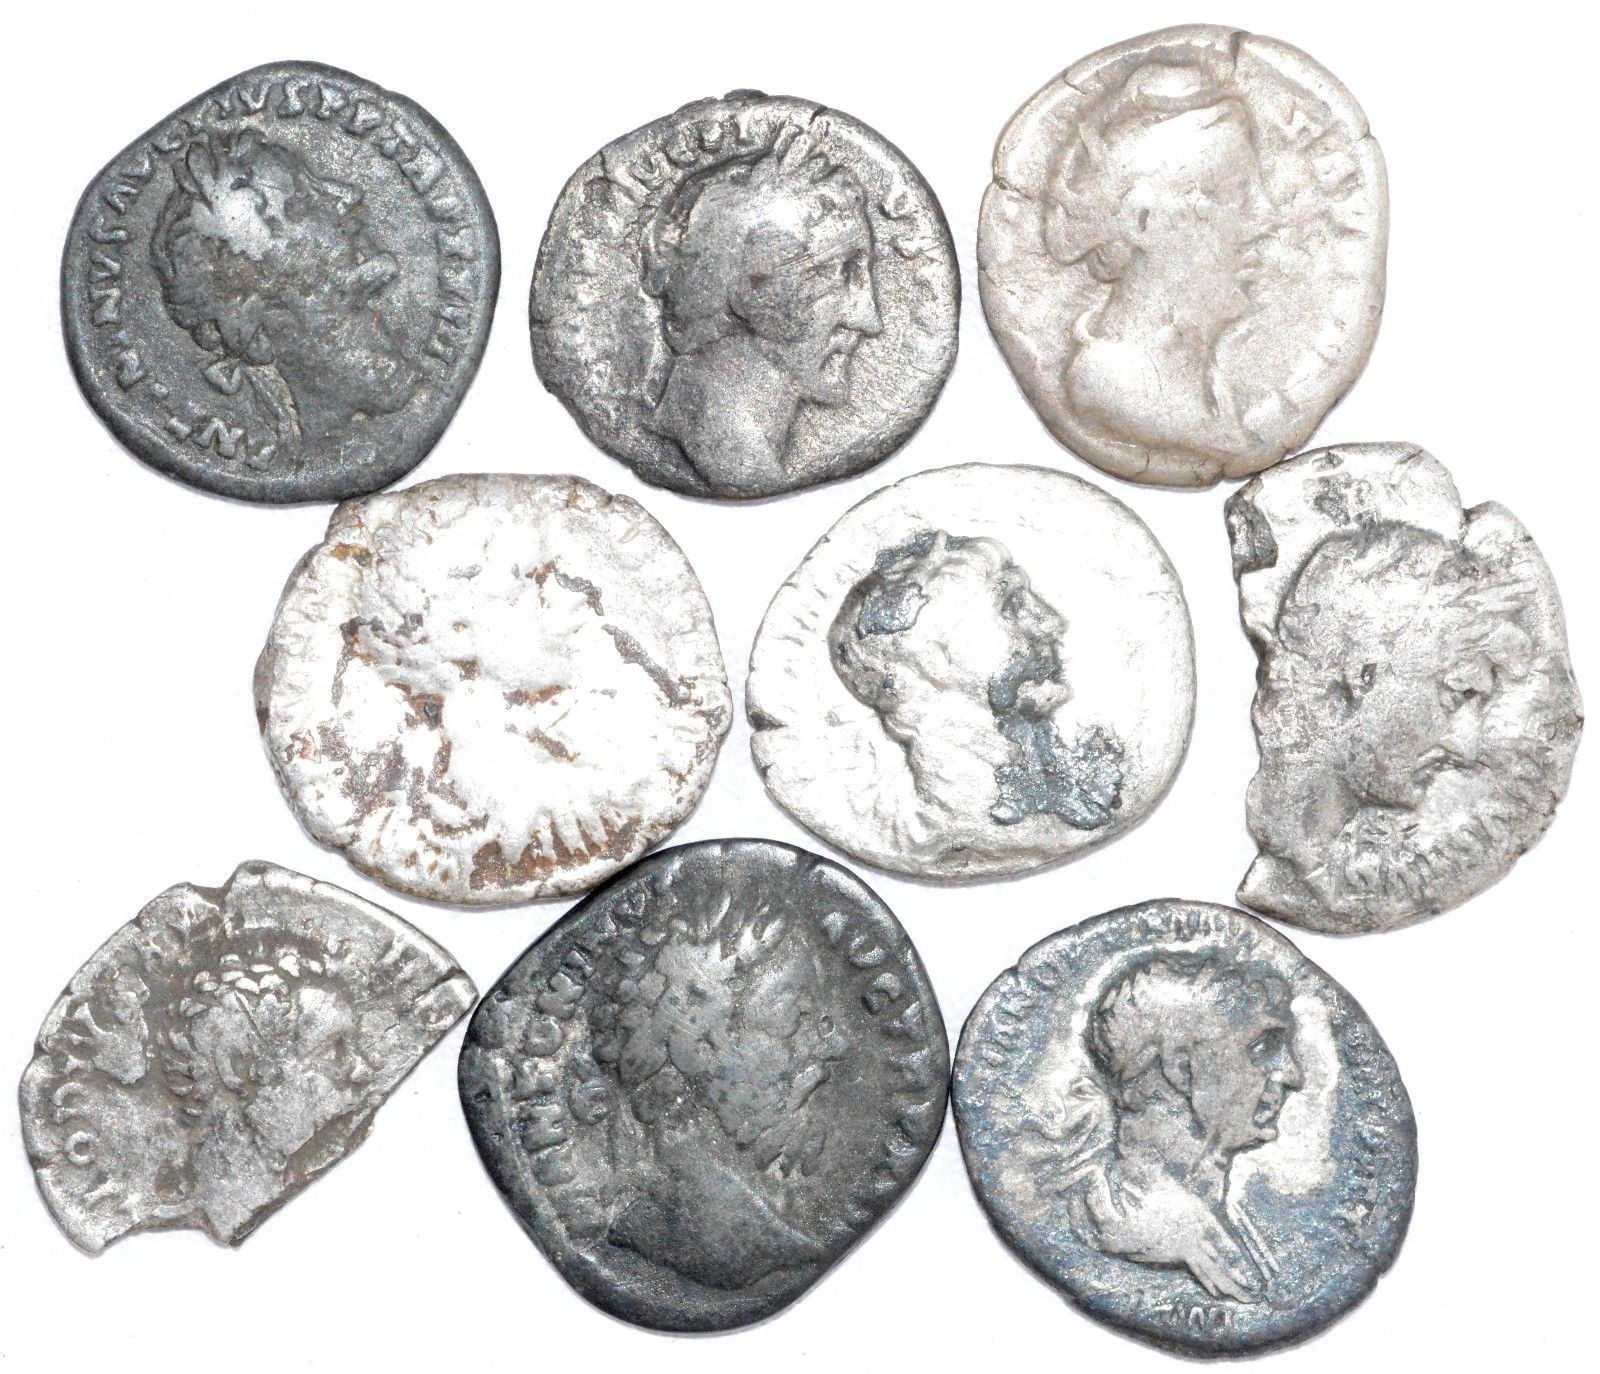 Lot of 9 ROMAN COINS Silver Denarii - 2nd C - Different Emperors - A744